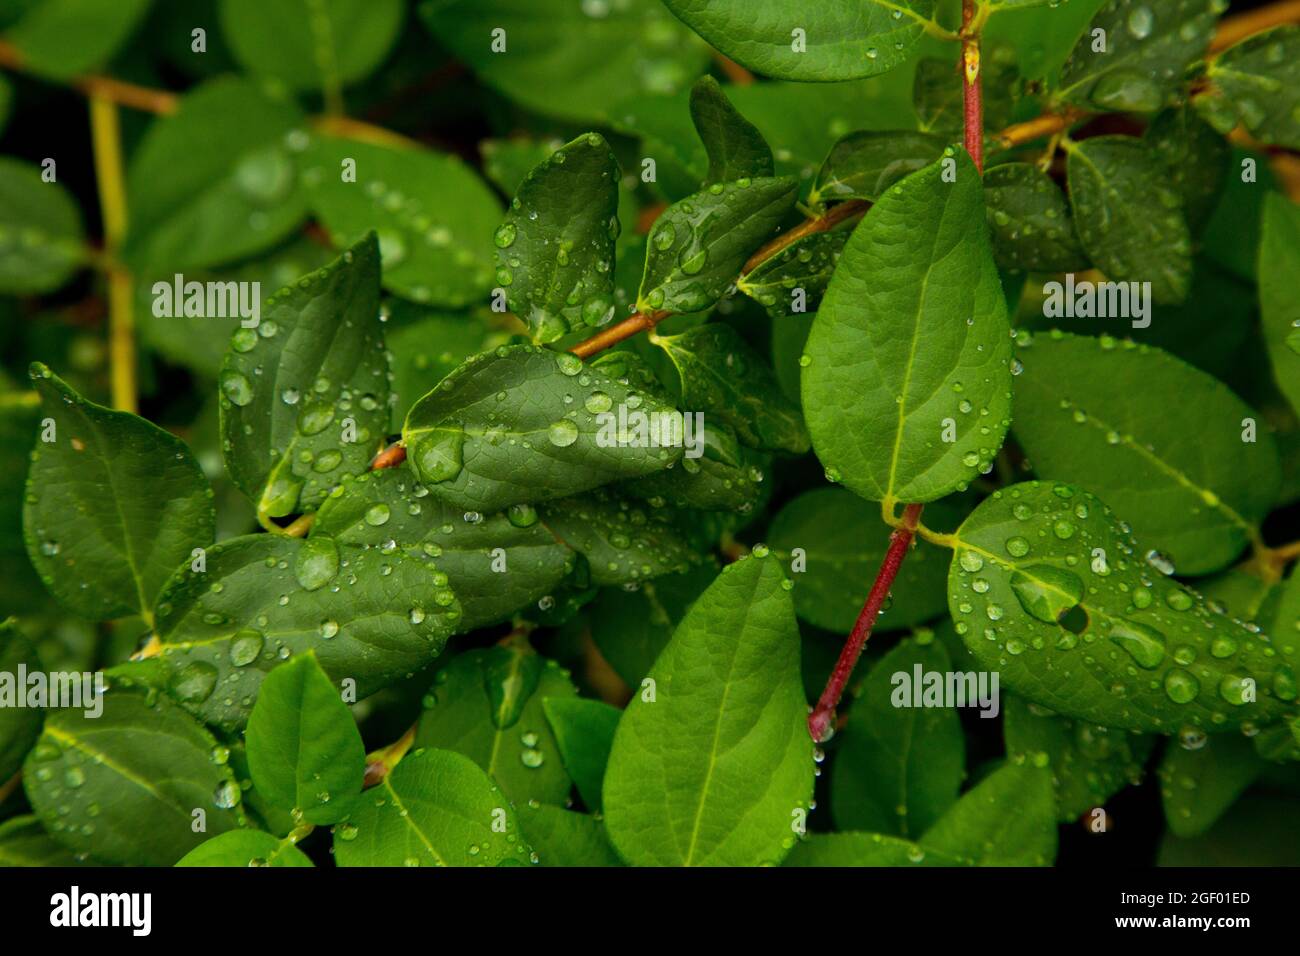 Texture of intertwined leaves and water drops Stock Photo